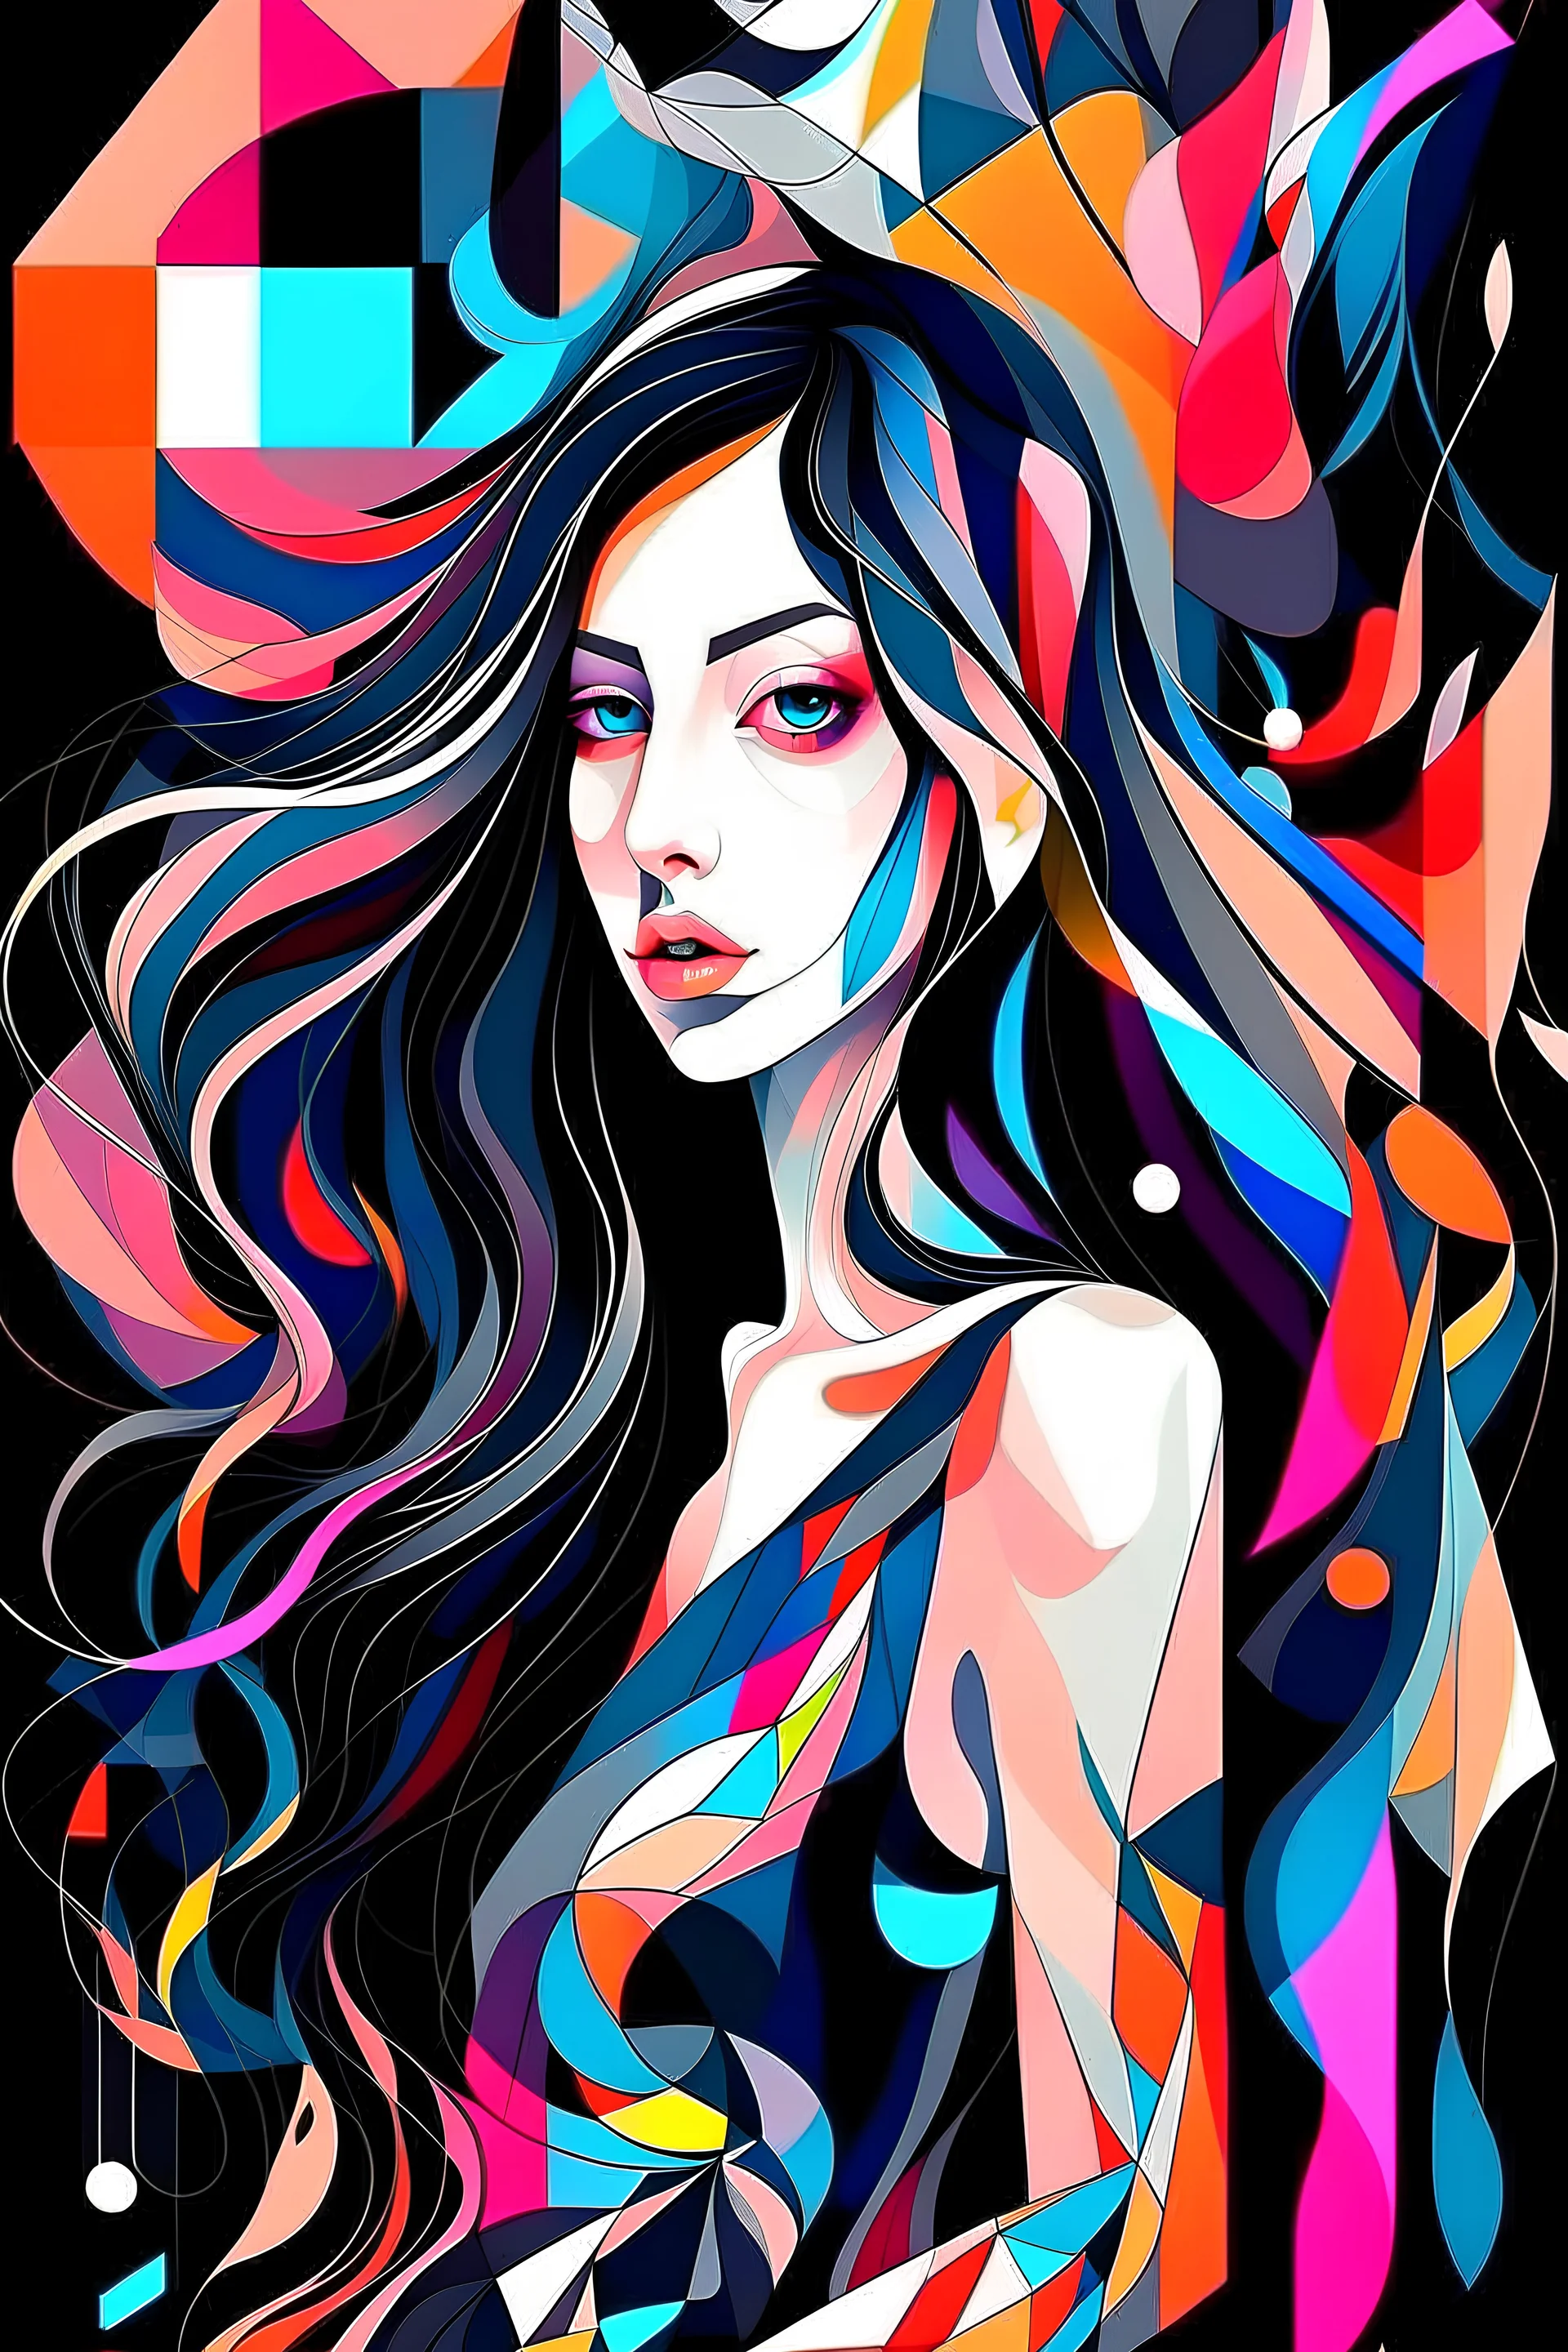 Neo Surrealism, whimsical art, Analytical Cubism Illustration Design a perfect pretty girl, black long hair, Split-Complementary color guide, Plasma Energy Texture, abstract background, girl, Pose with movement, often for geometric deconstruction, monochromatic palette, or fragmented forms.